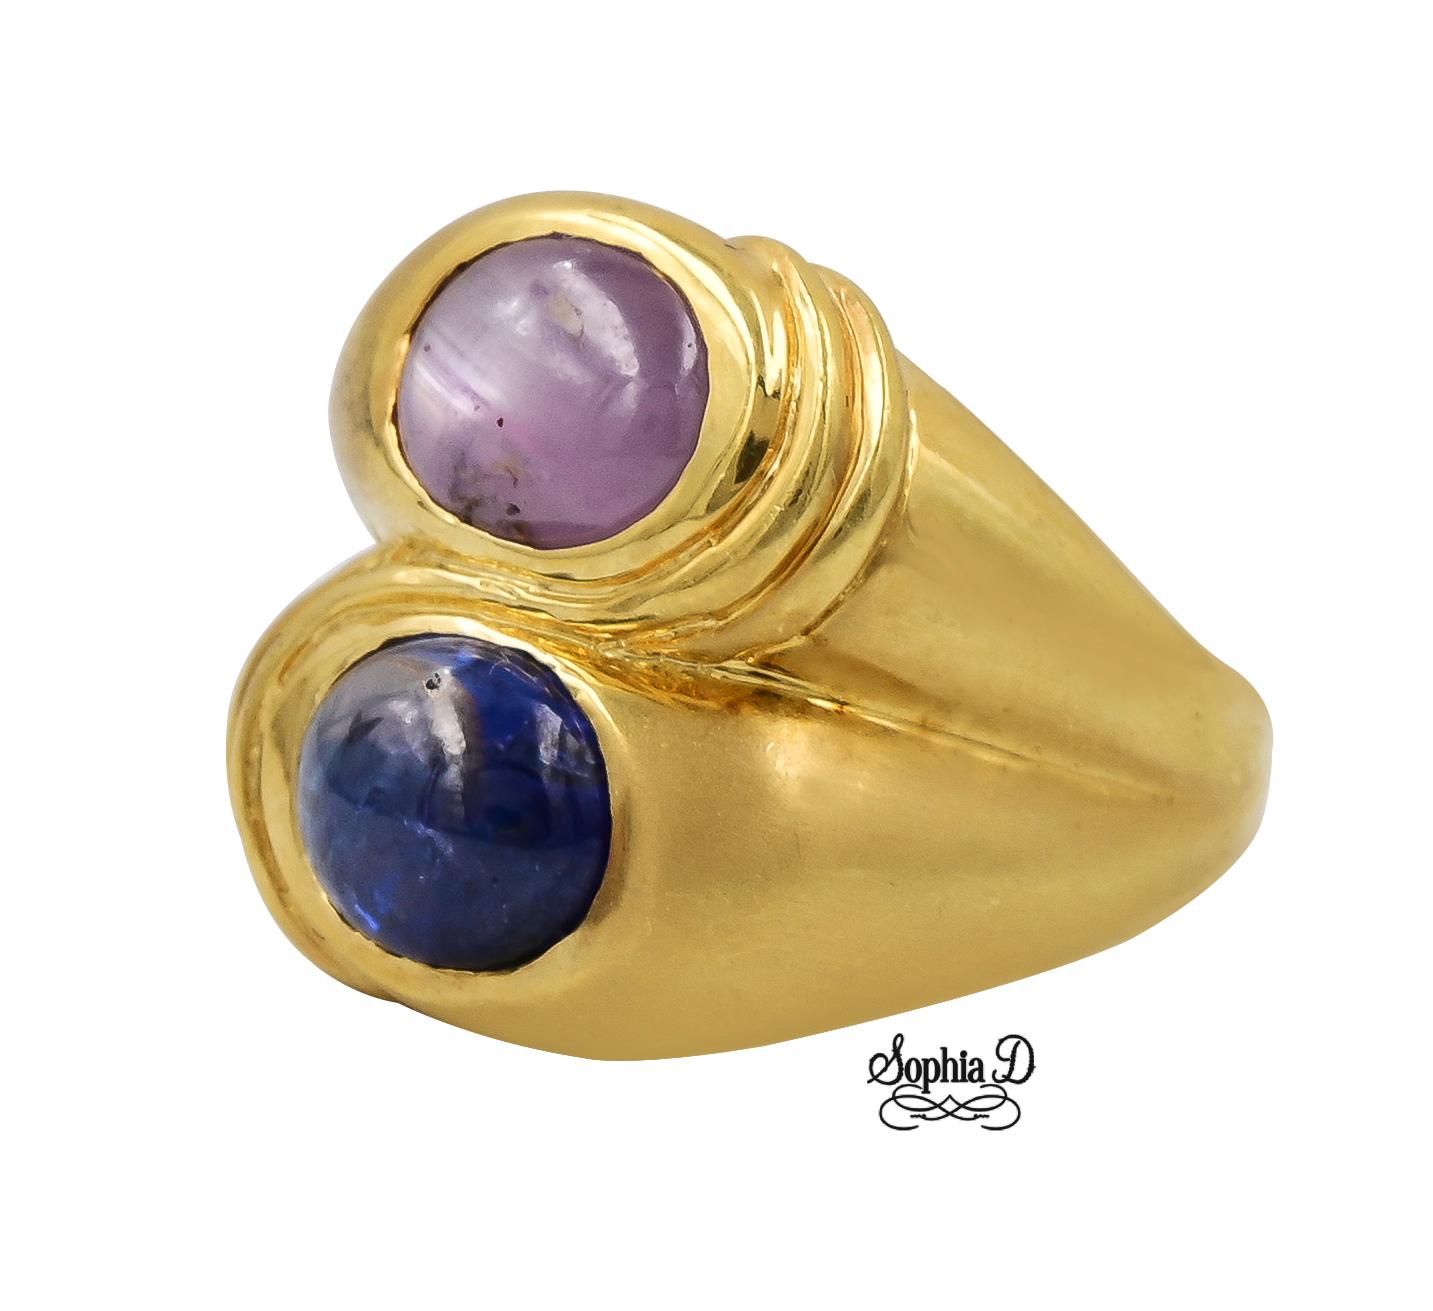 18K yellow gold ring with sapphires.

Sophia D by Joseph Dardashti LTD has been known worldwide for 35 years and are inspired by classic Art Deco design that merges with modern manufacturing techniques. 